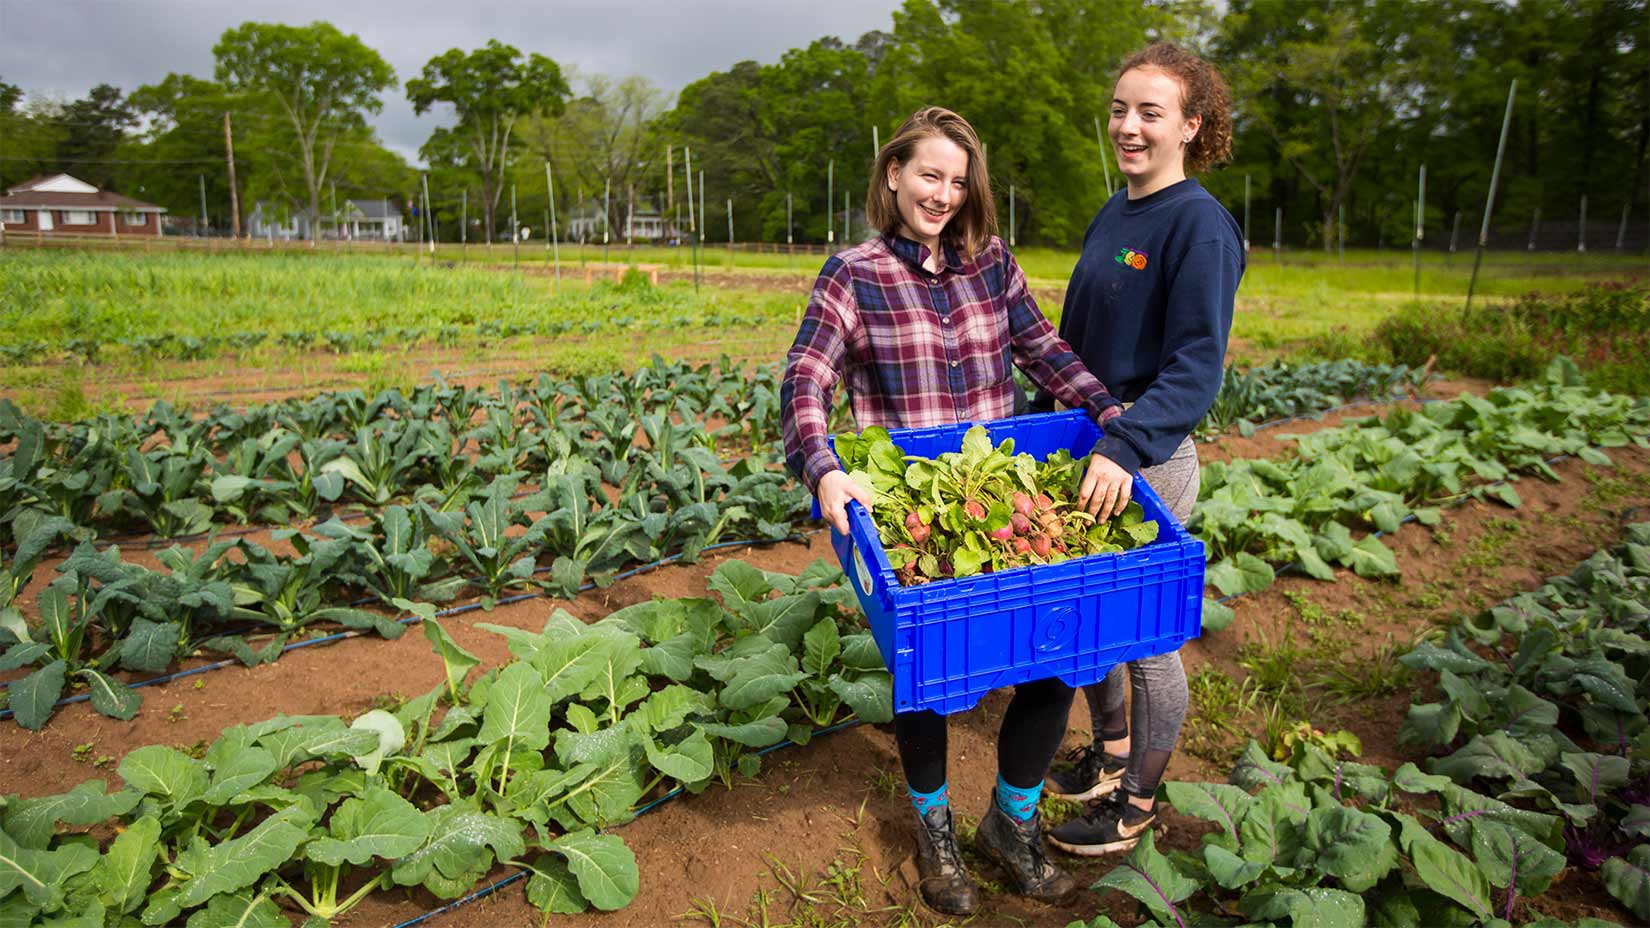 Oxford students harvest vegetables from the farm.